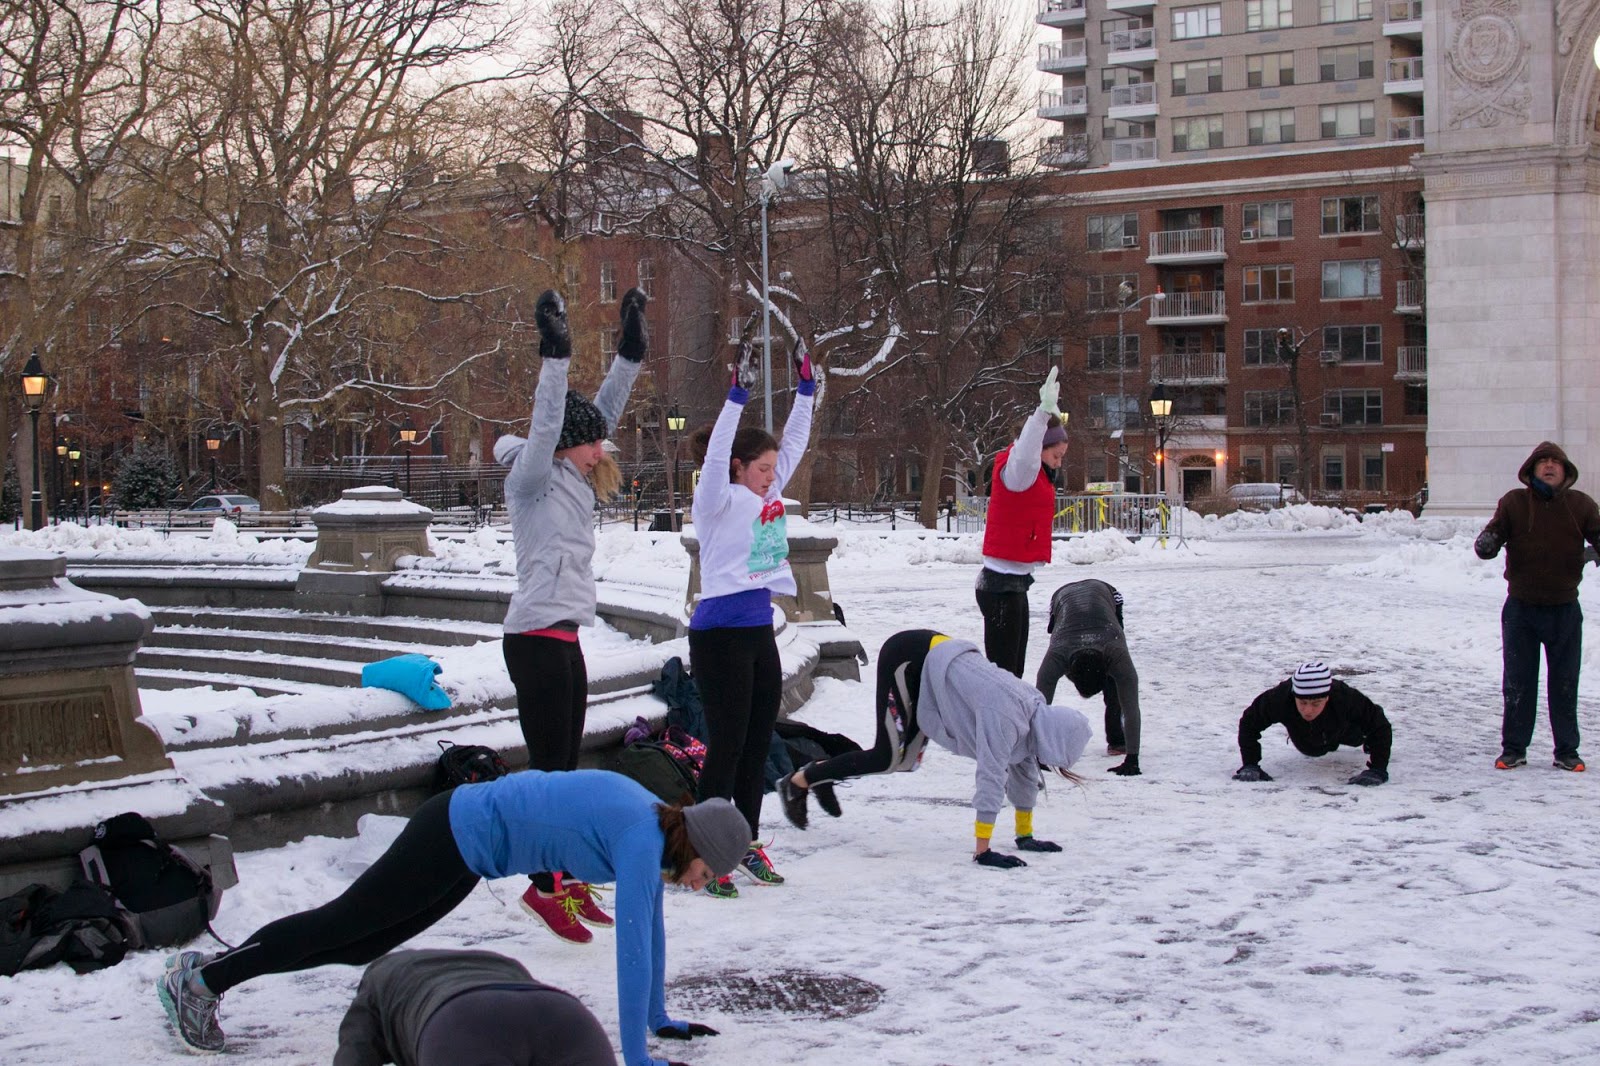 Get Fit Boot Camp - Boot Camp In The Snow!